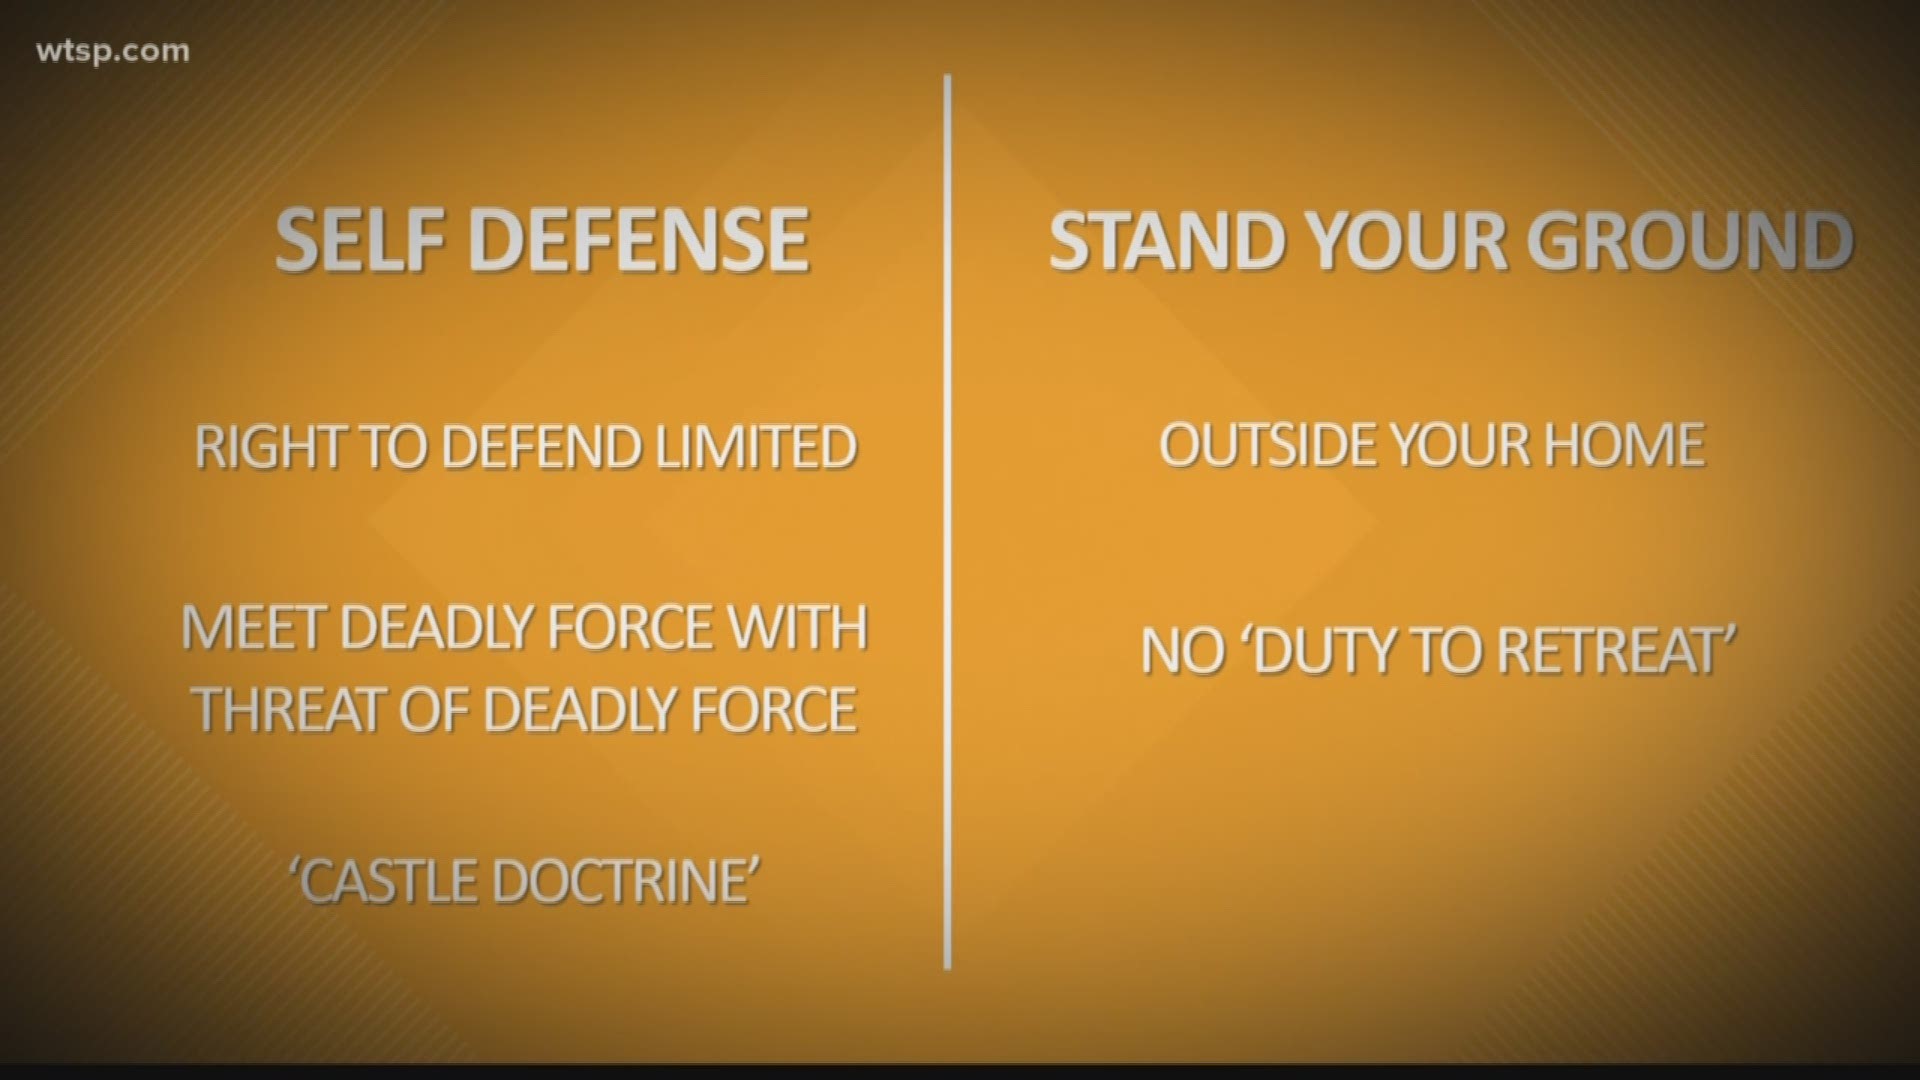 10News reporter Josh Sidorowicz explains the difference between Florida's "stand your ground" law and self defense.